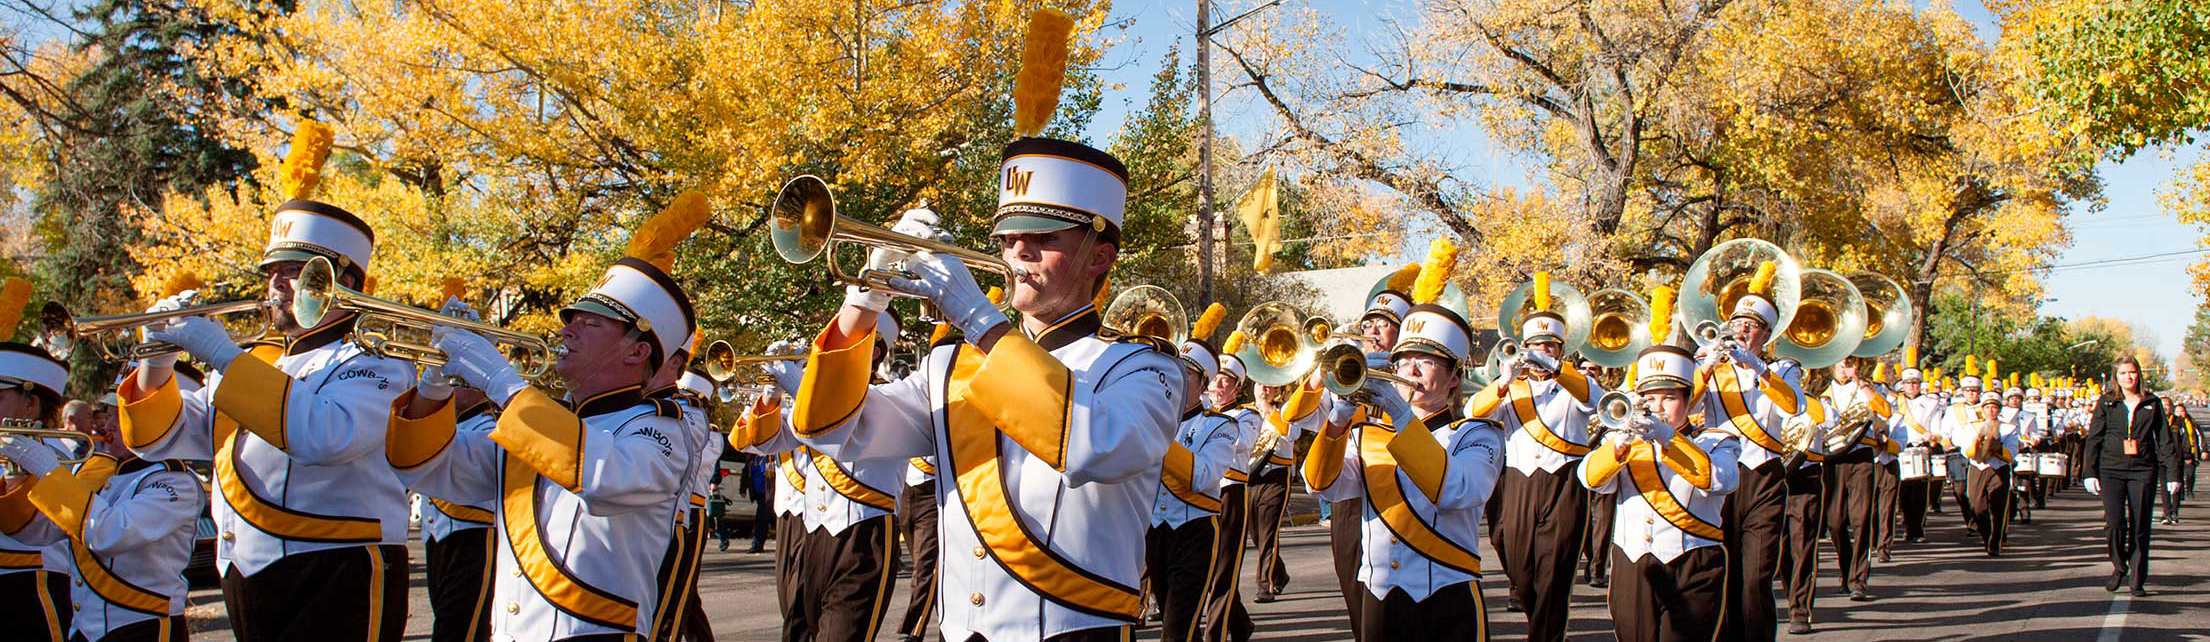 Image of Marching Band